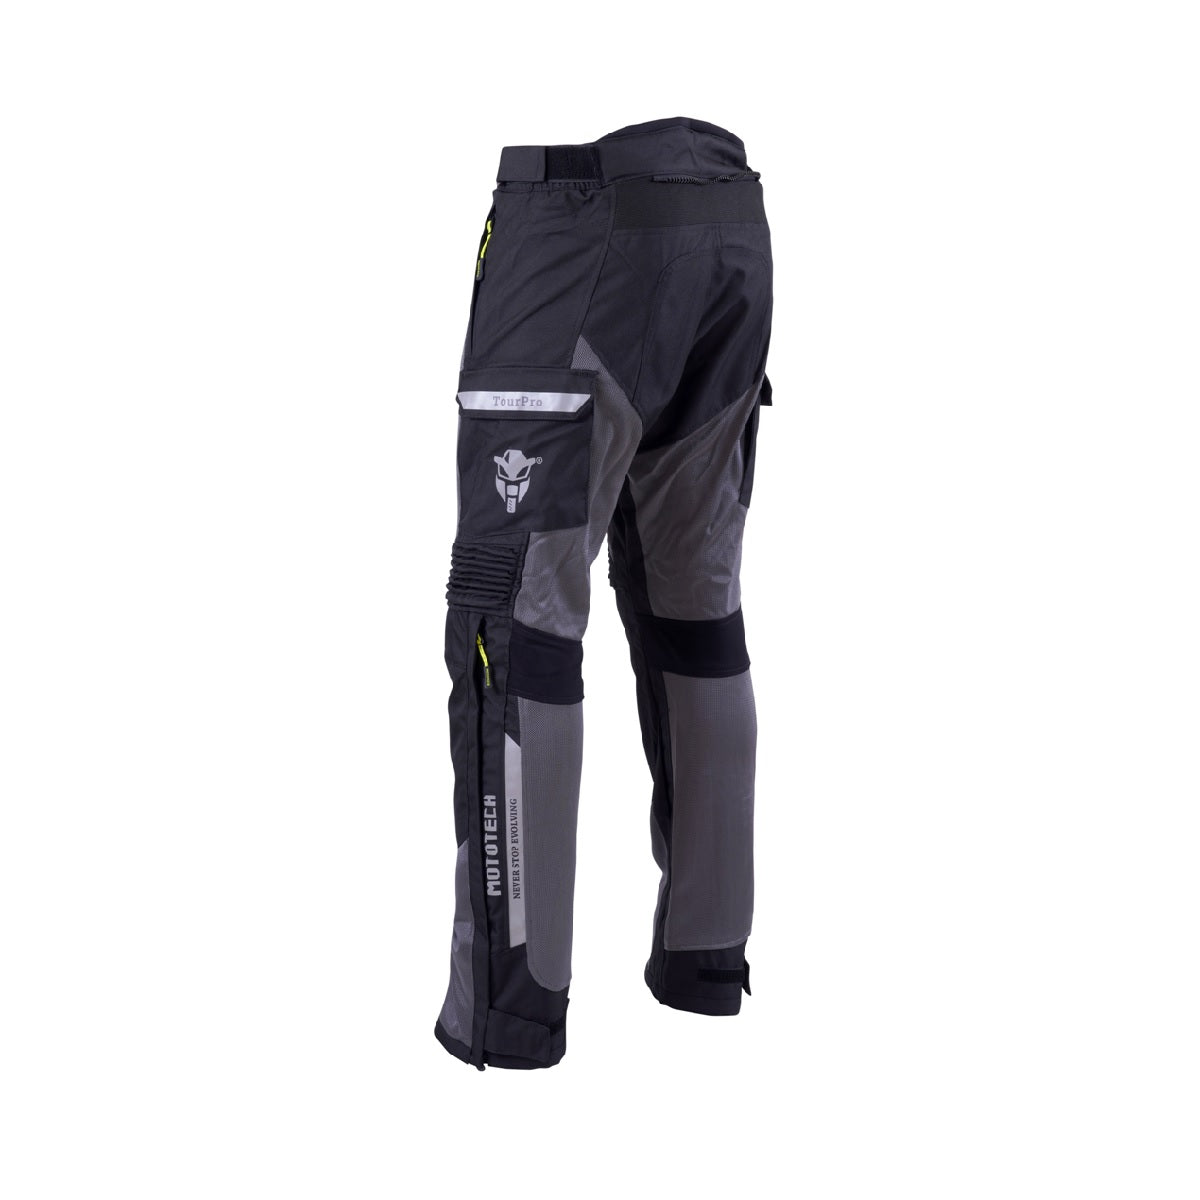 Perfect pants: Best motorcycle trousers as chosen by MCN